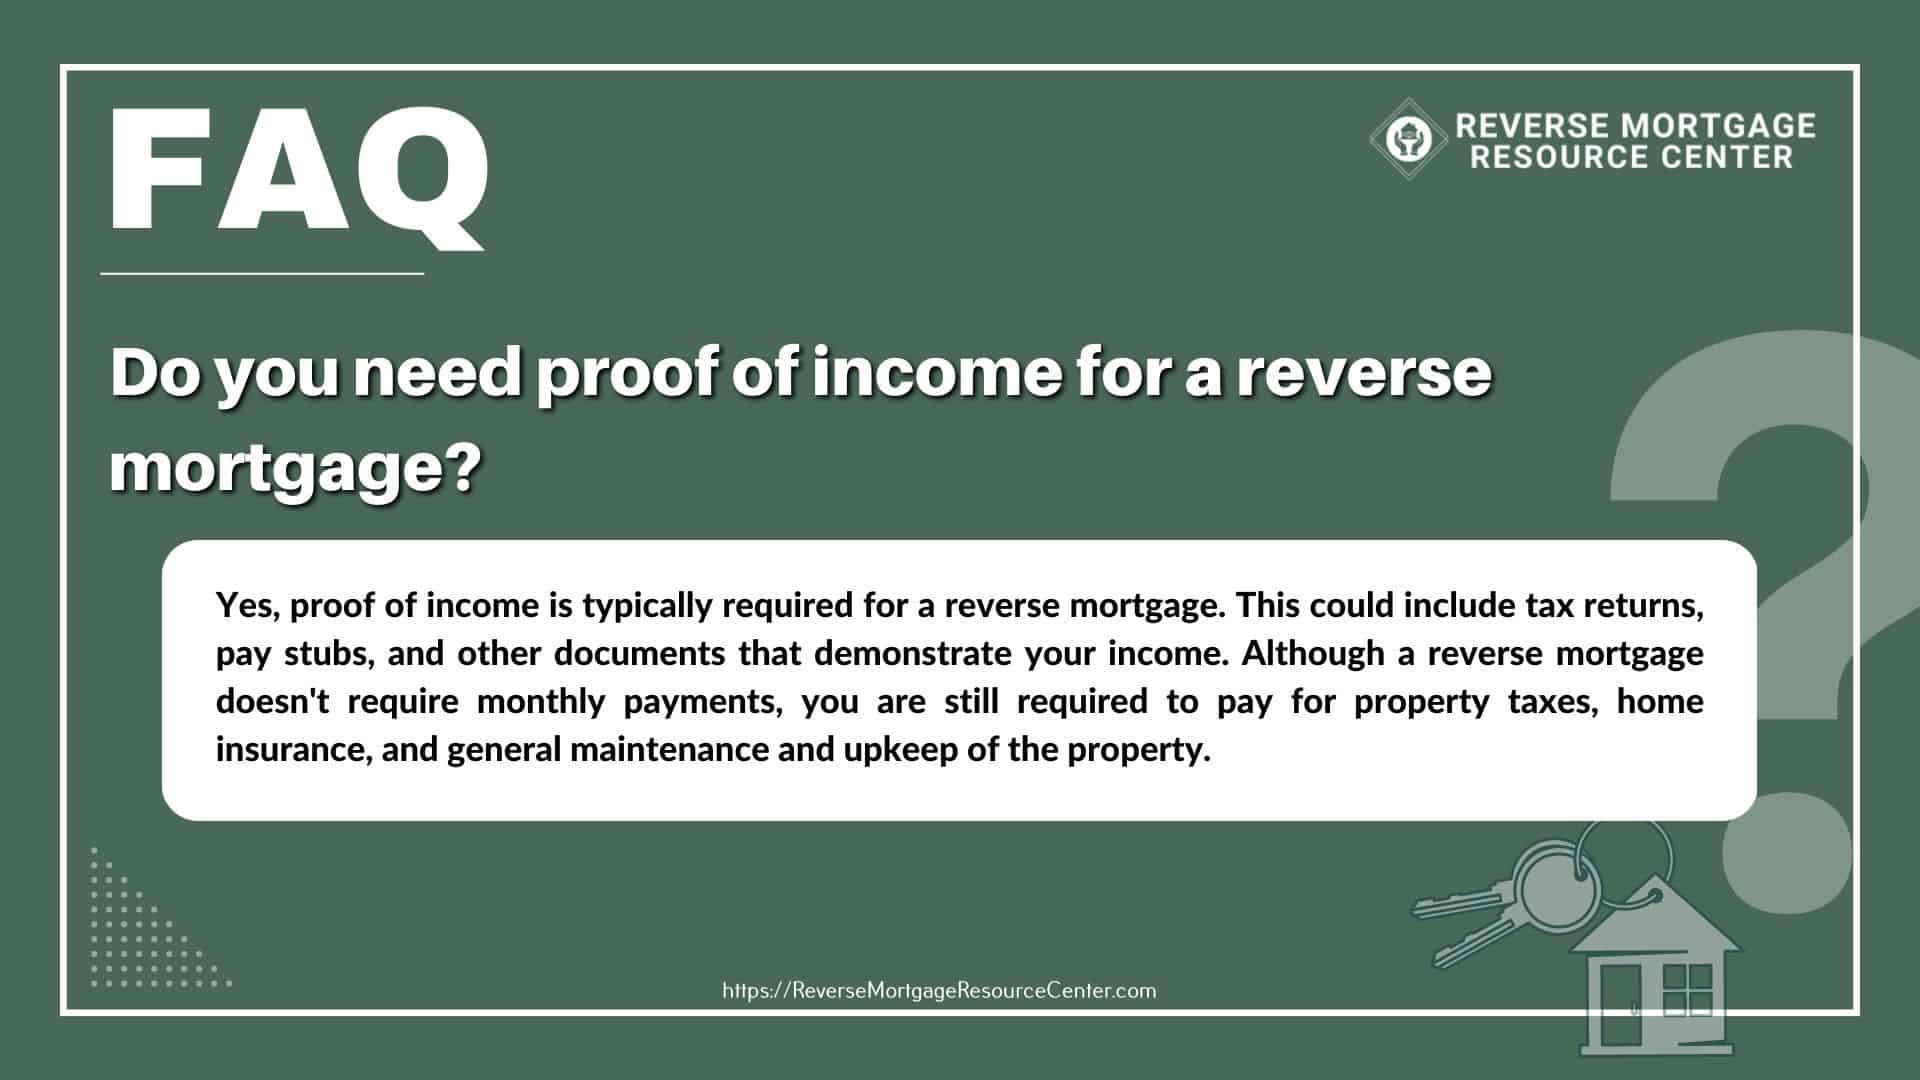 Do you need proof of income for a reverse mortgage?